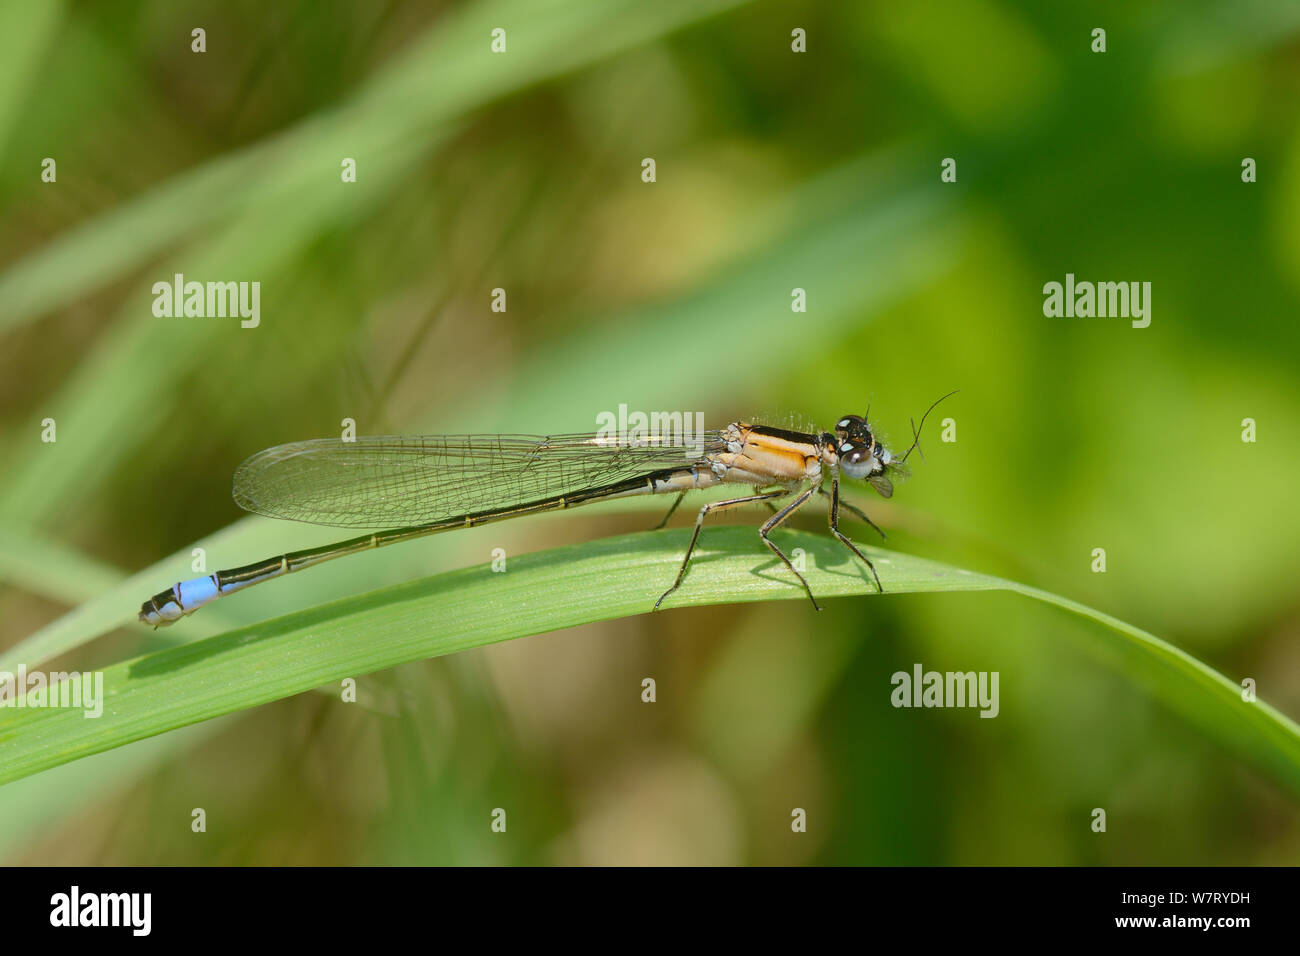 Female Blue tailed damselfy (Ischnura elegans f. rufescens), rufescens form with salmon coloured thorax, resting on a grass blade near a pond, Wiltshire, UK, June. Stock Photo